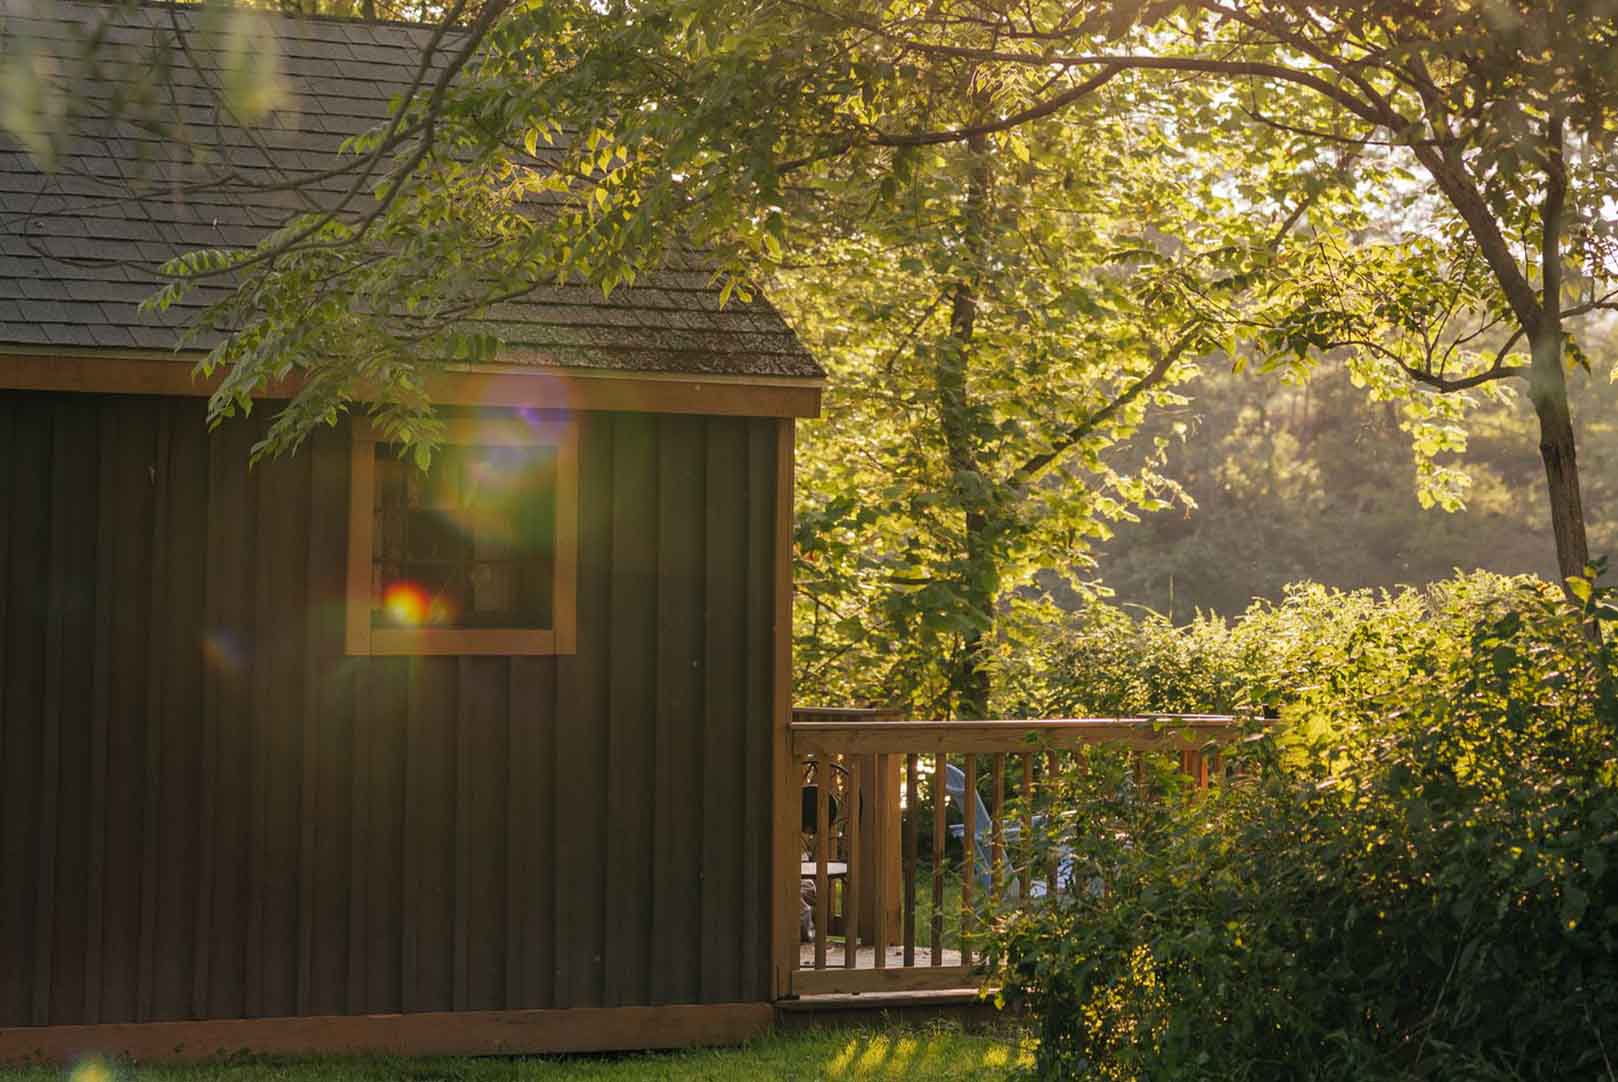 Seeking a Unique Getaway? Glamping at Preserve Battenkill River Provides Luxury Tents and Deluxe Cabin Options